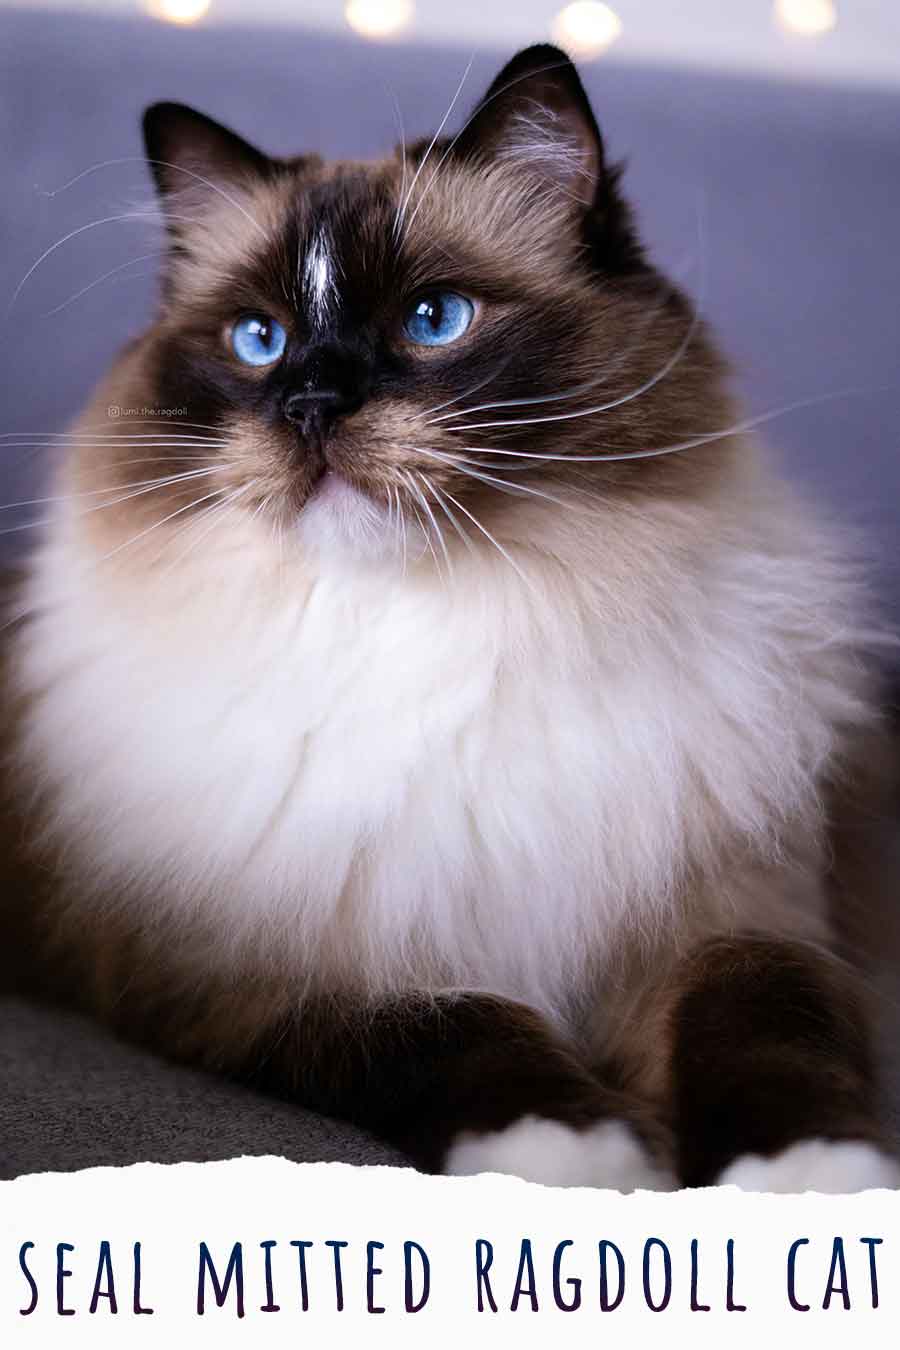 Seal Mitted Ragdoll Cat - Is This Ragdoll Variety Right For You?